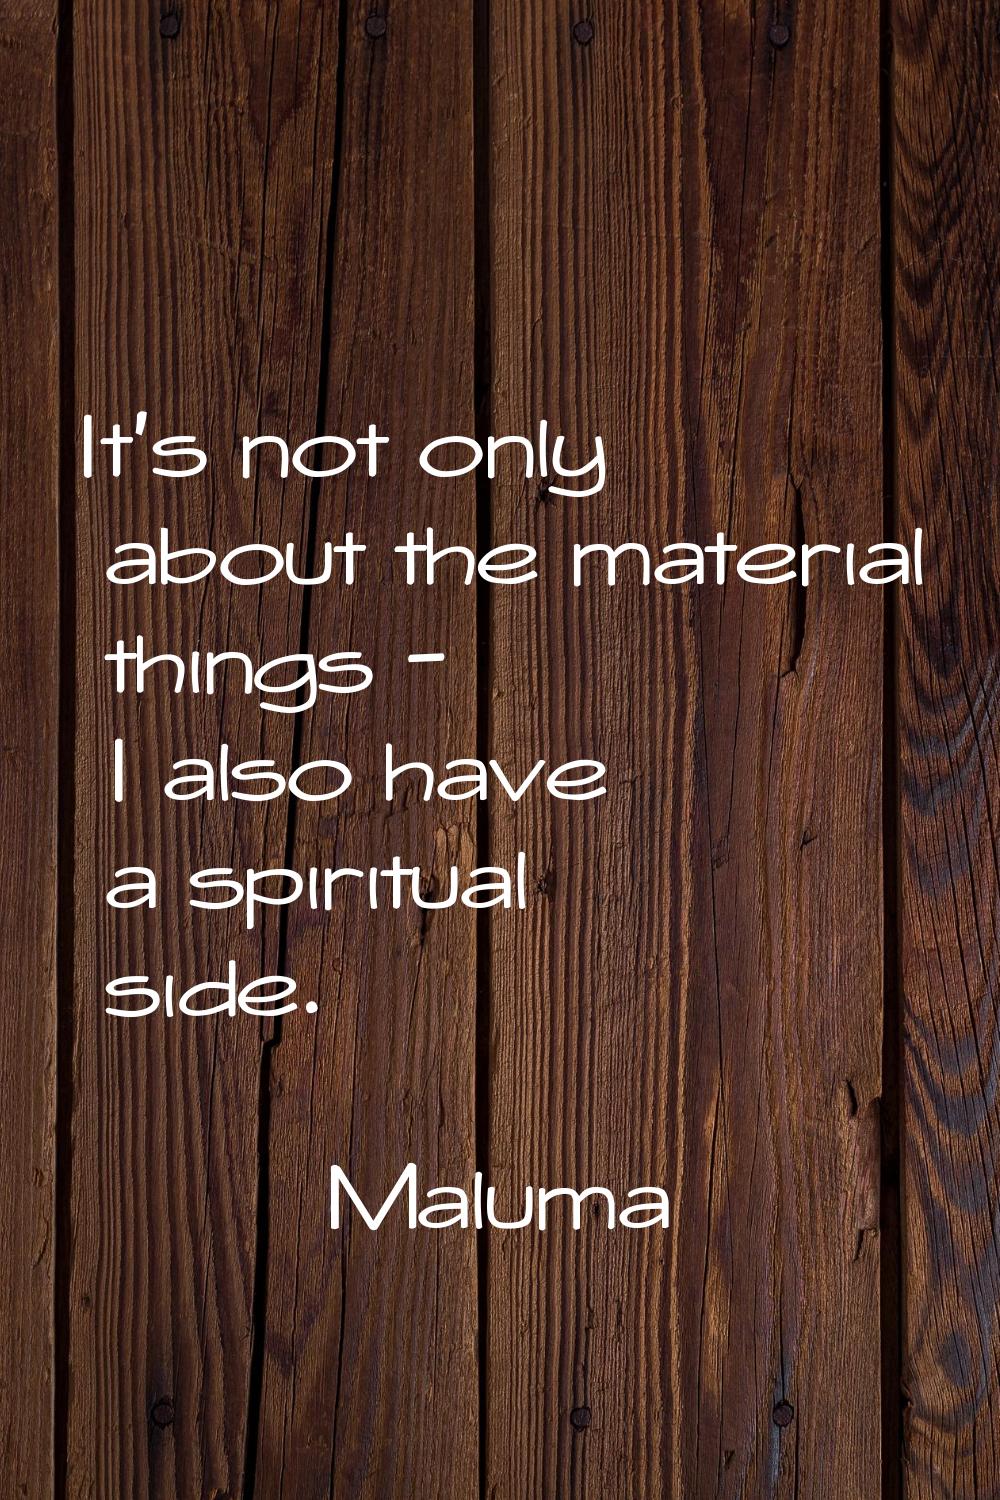 It's not only about the material things - I also have a spiritual side.